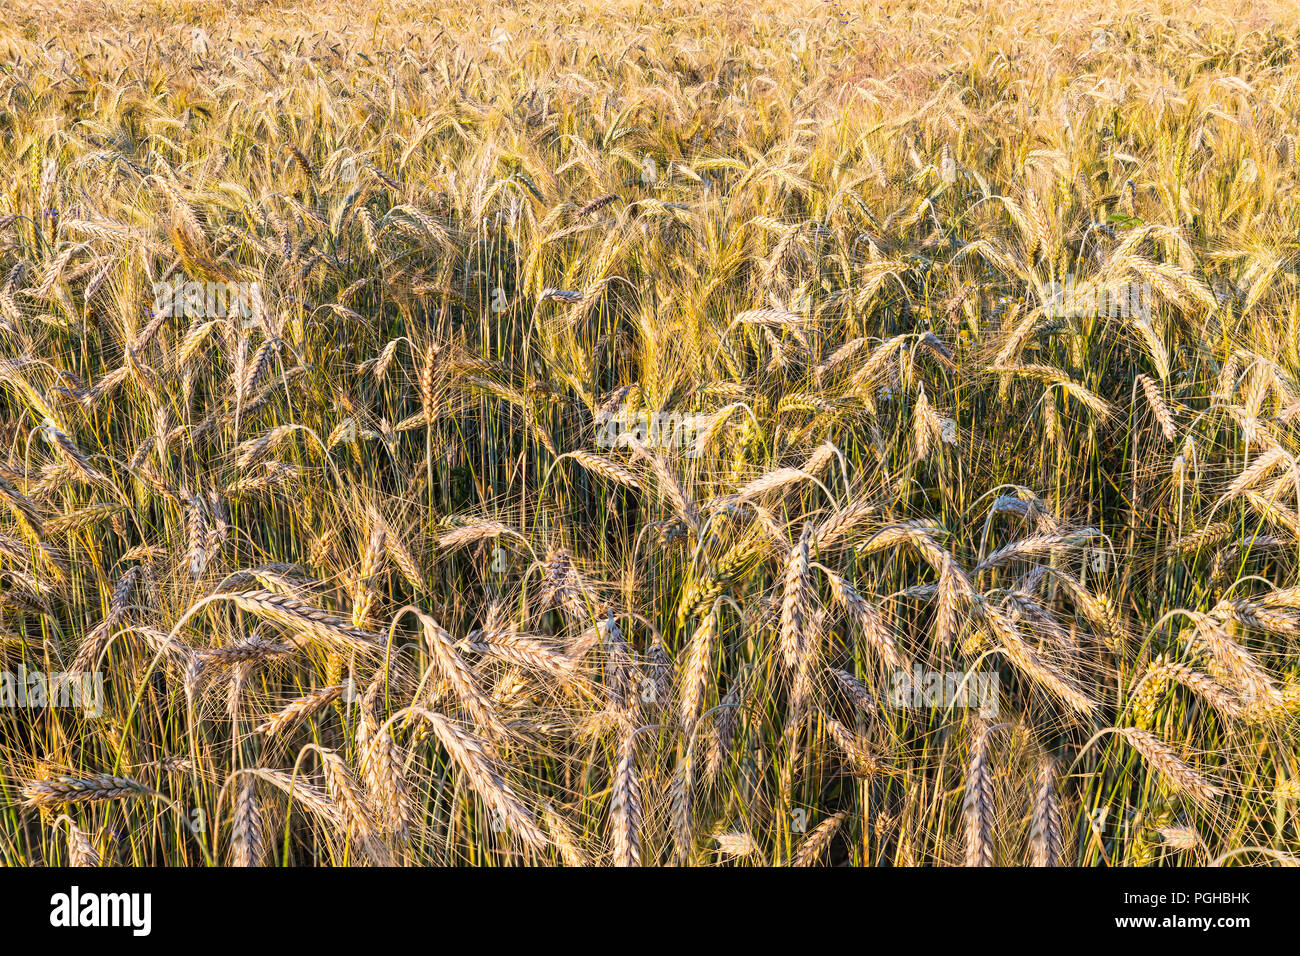 Rural field of ripe rye ears as background. Secale cereale. Golden grain spikes close-up in summer rural landscape. Natural texture of organic crop. Stock Photo